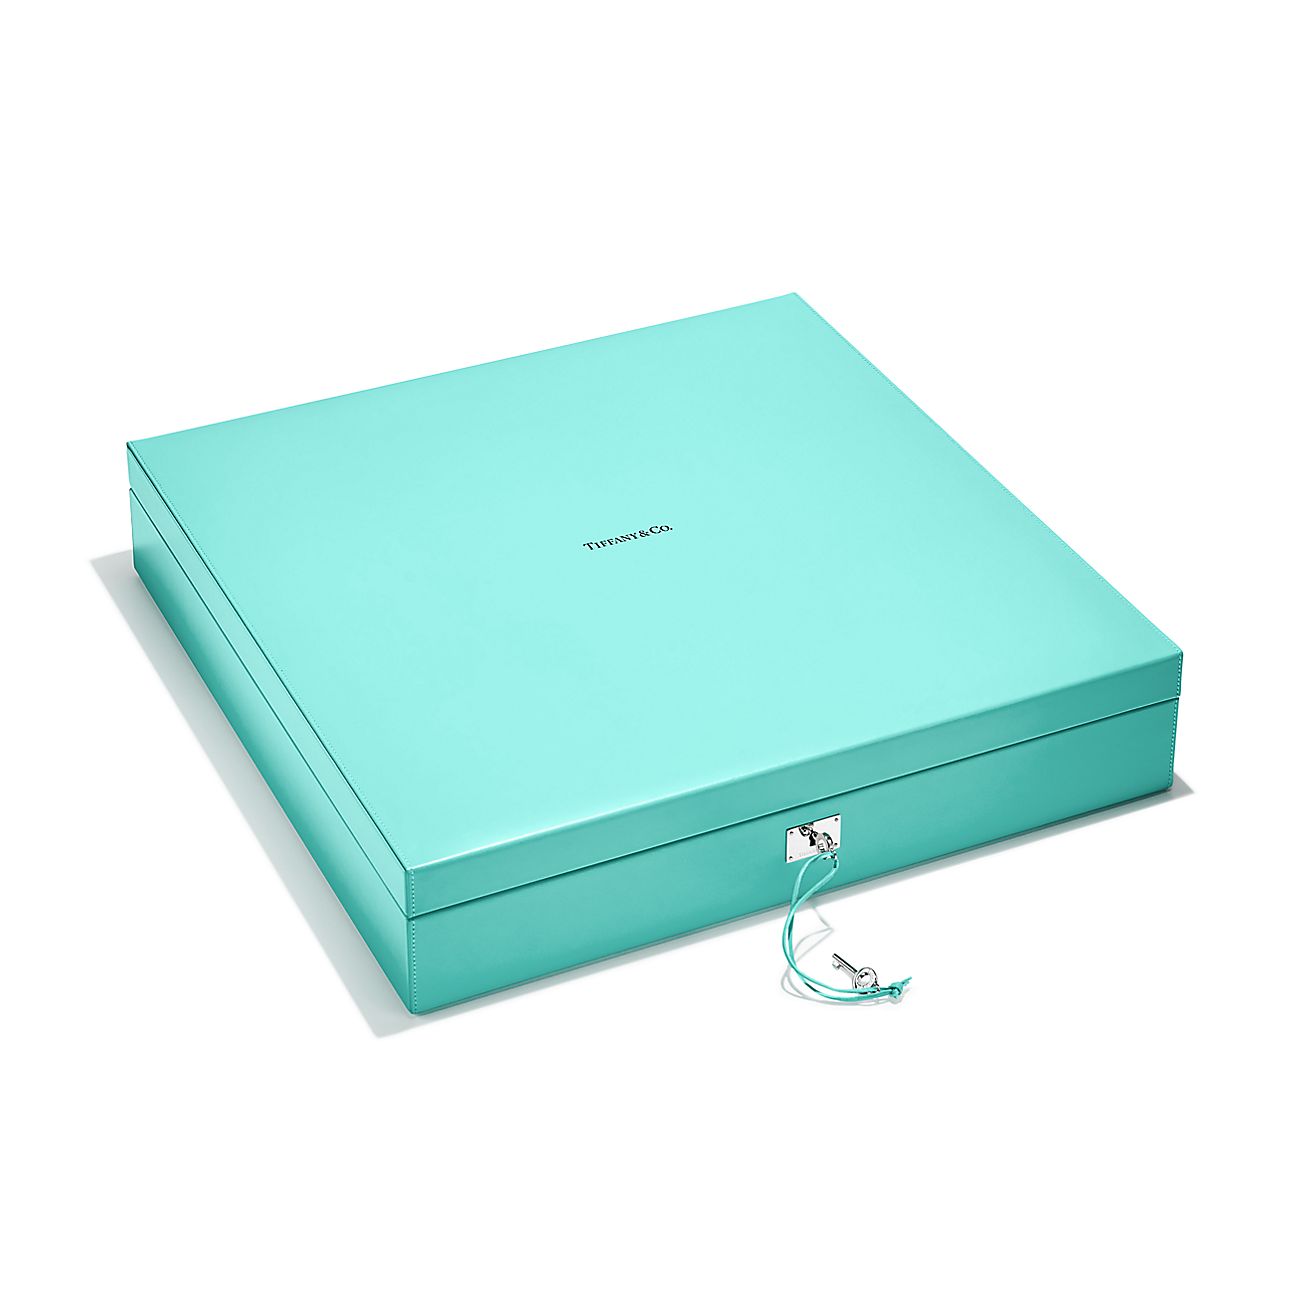 Everyday Objects mahjong set in a Tiffany Blue® leather box.